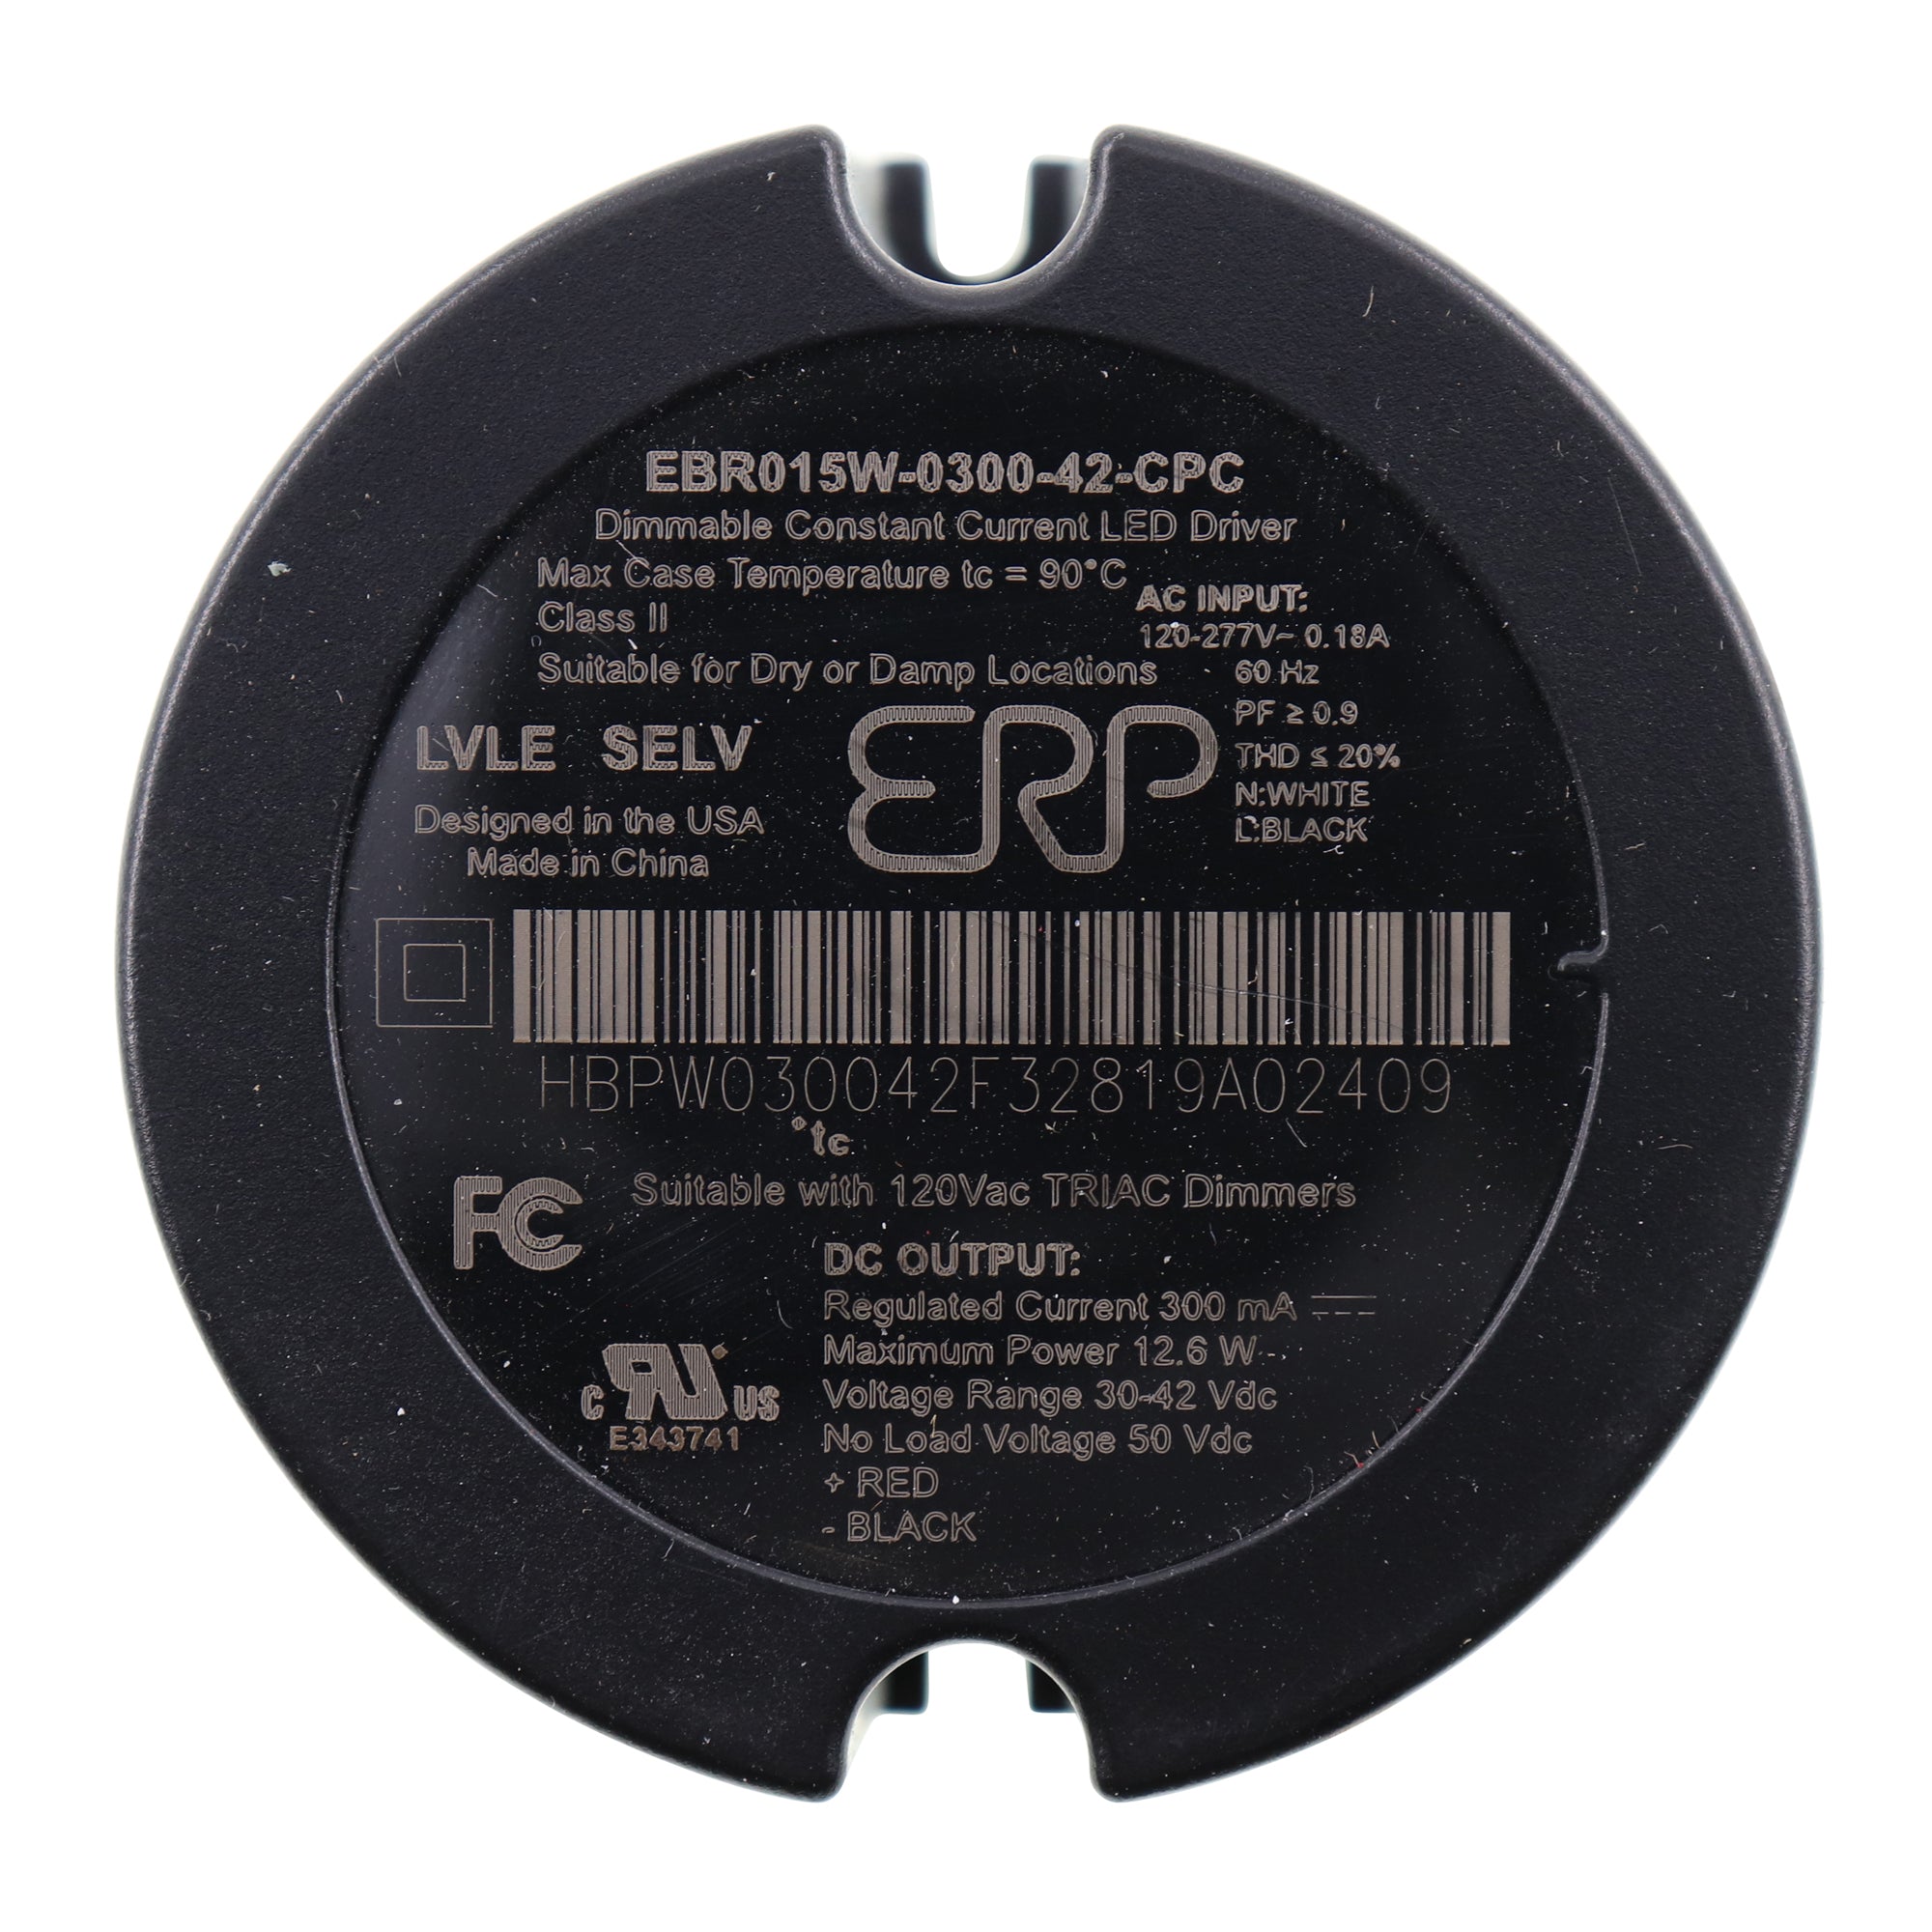 ERP, ERP EBRO15W-0300-42-CPC DIMMABLE LED DRIVER, 12.6W, 30-42VDC, 300MA, 120-277V